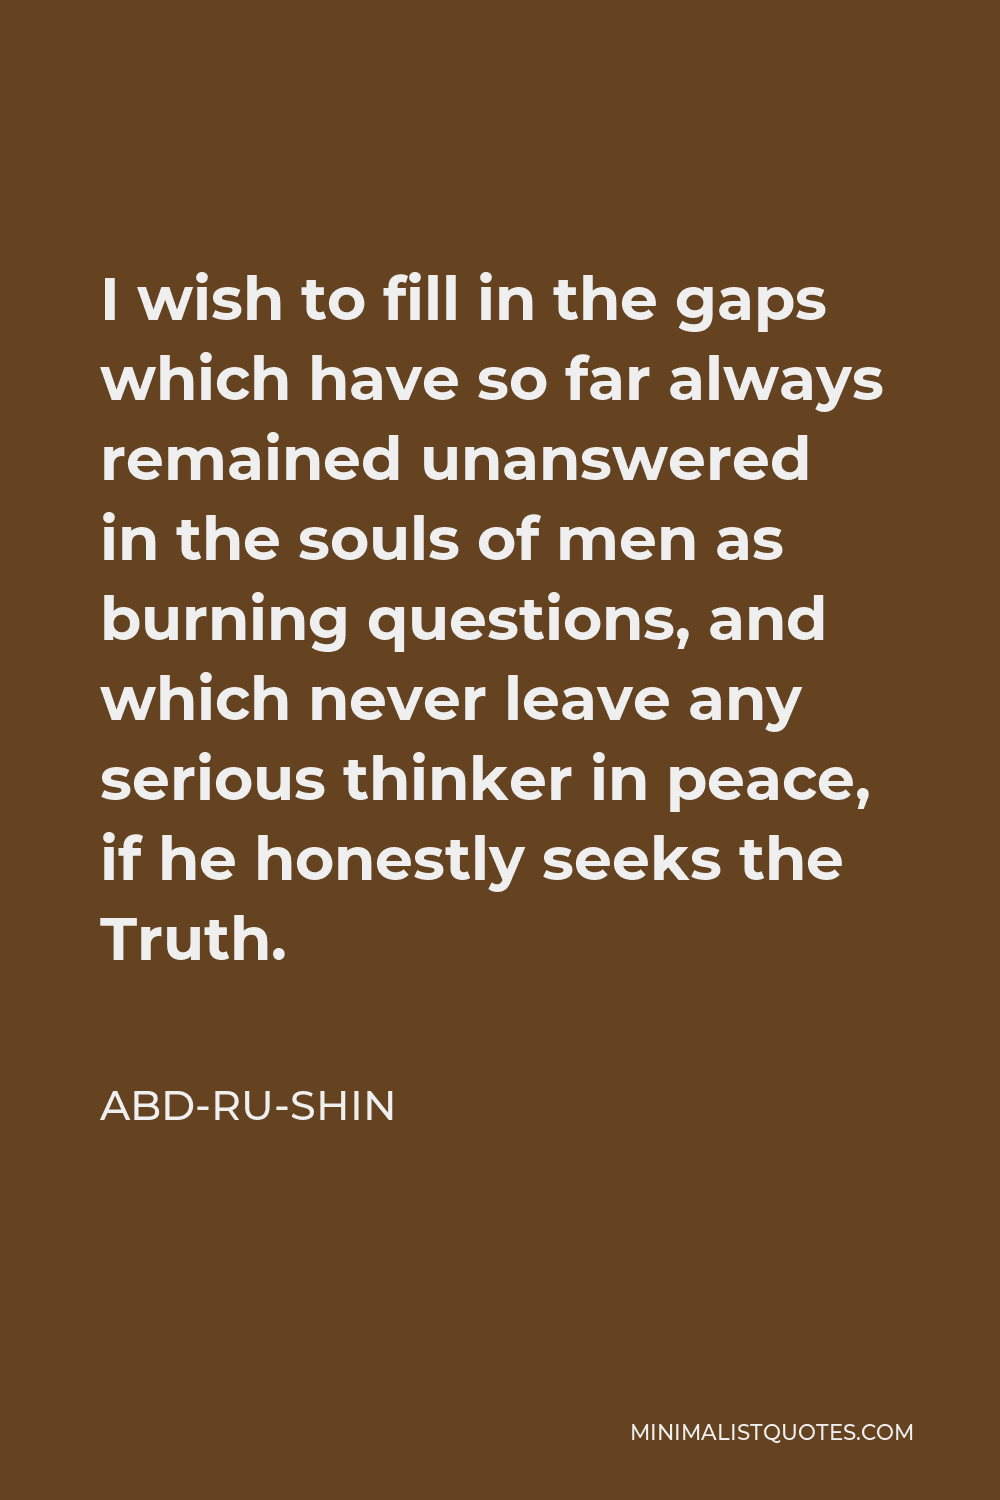 Abd-ru-shin Quote - I wish to fill in the gaps which have so far always remained unanswered in the souls of men as burning questions, and which never leave any serious thinker in peace, if he honestly seeks the Truth.